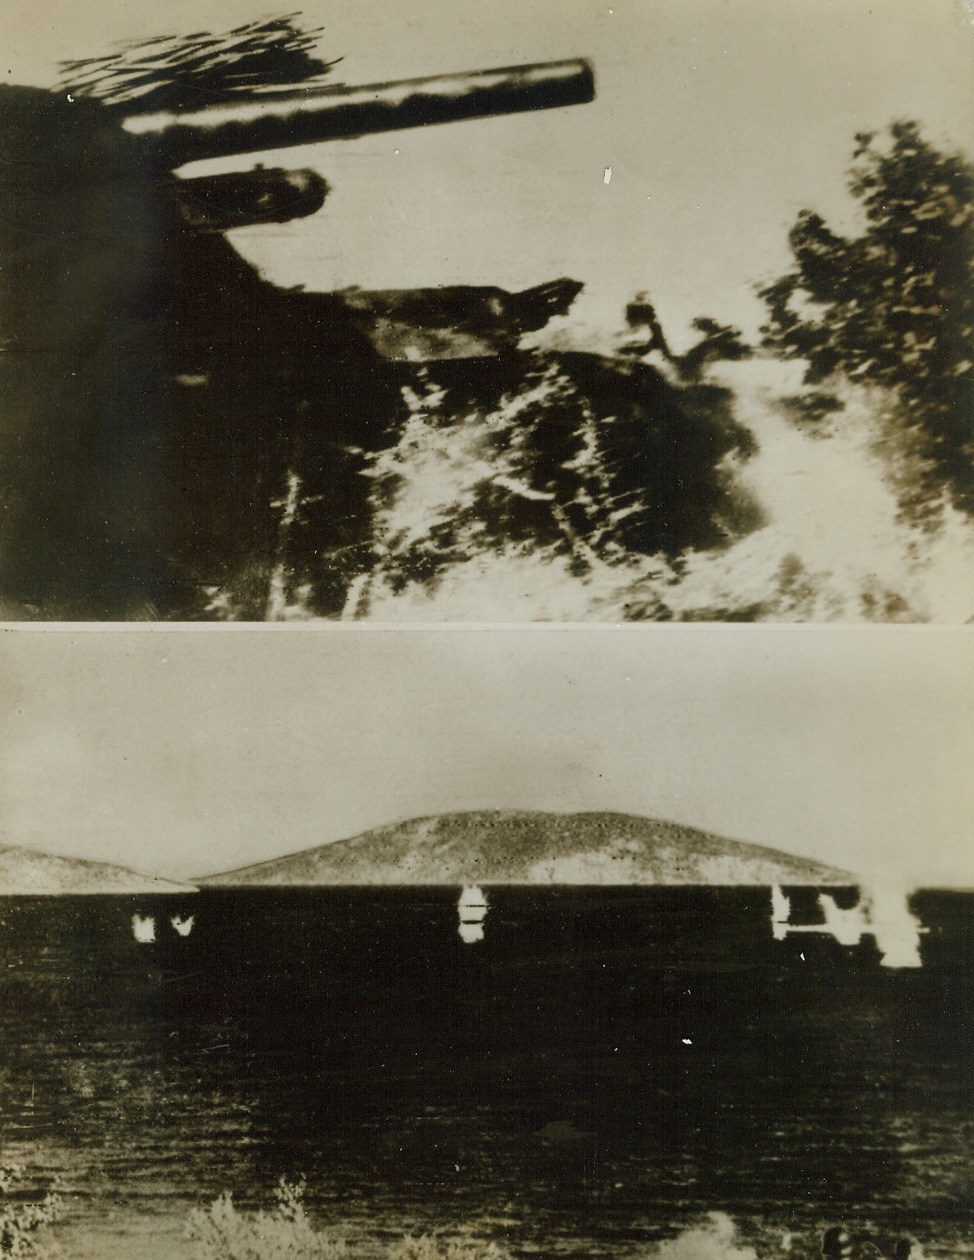 HITLER'S HUMMEL-HUMMEL GUN, 1/7/1944. IN THE SOUTH-EASTERN BALKANS—From a neutral source comes this pair of photos, showing the Nazis’ new Hummel-Hummel gun, just installed on the coast of the Southeastern Balkans, and (below) the gun’s shells are fired at water level. The shells then ricochet across the surface, bounding toward enemy landing craft.;